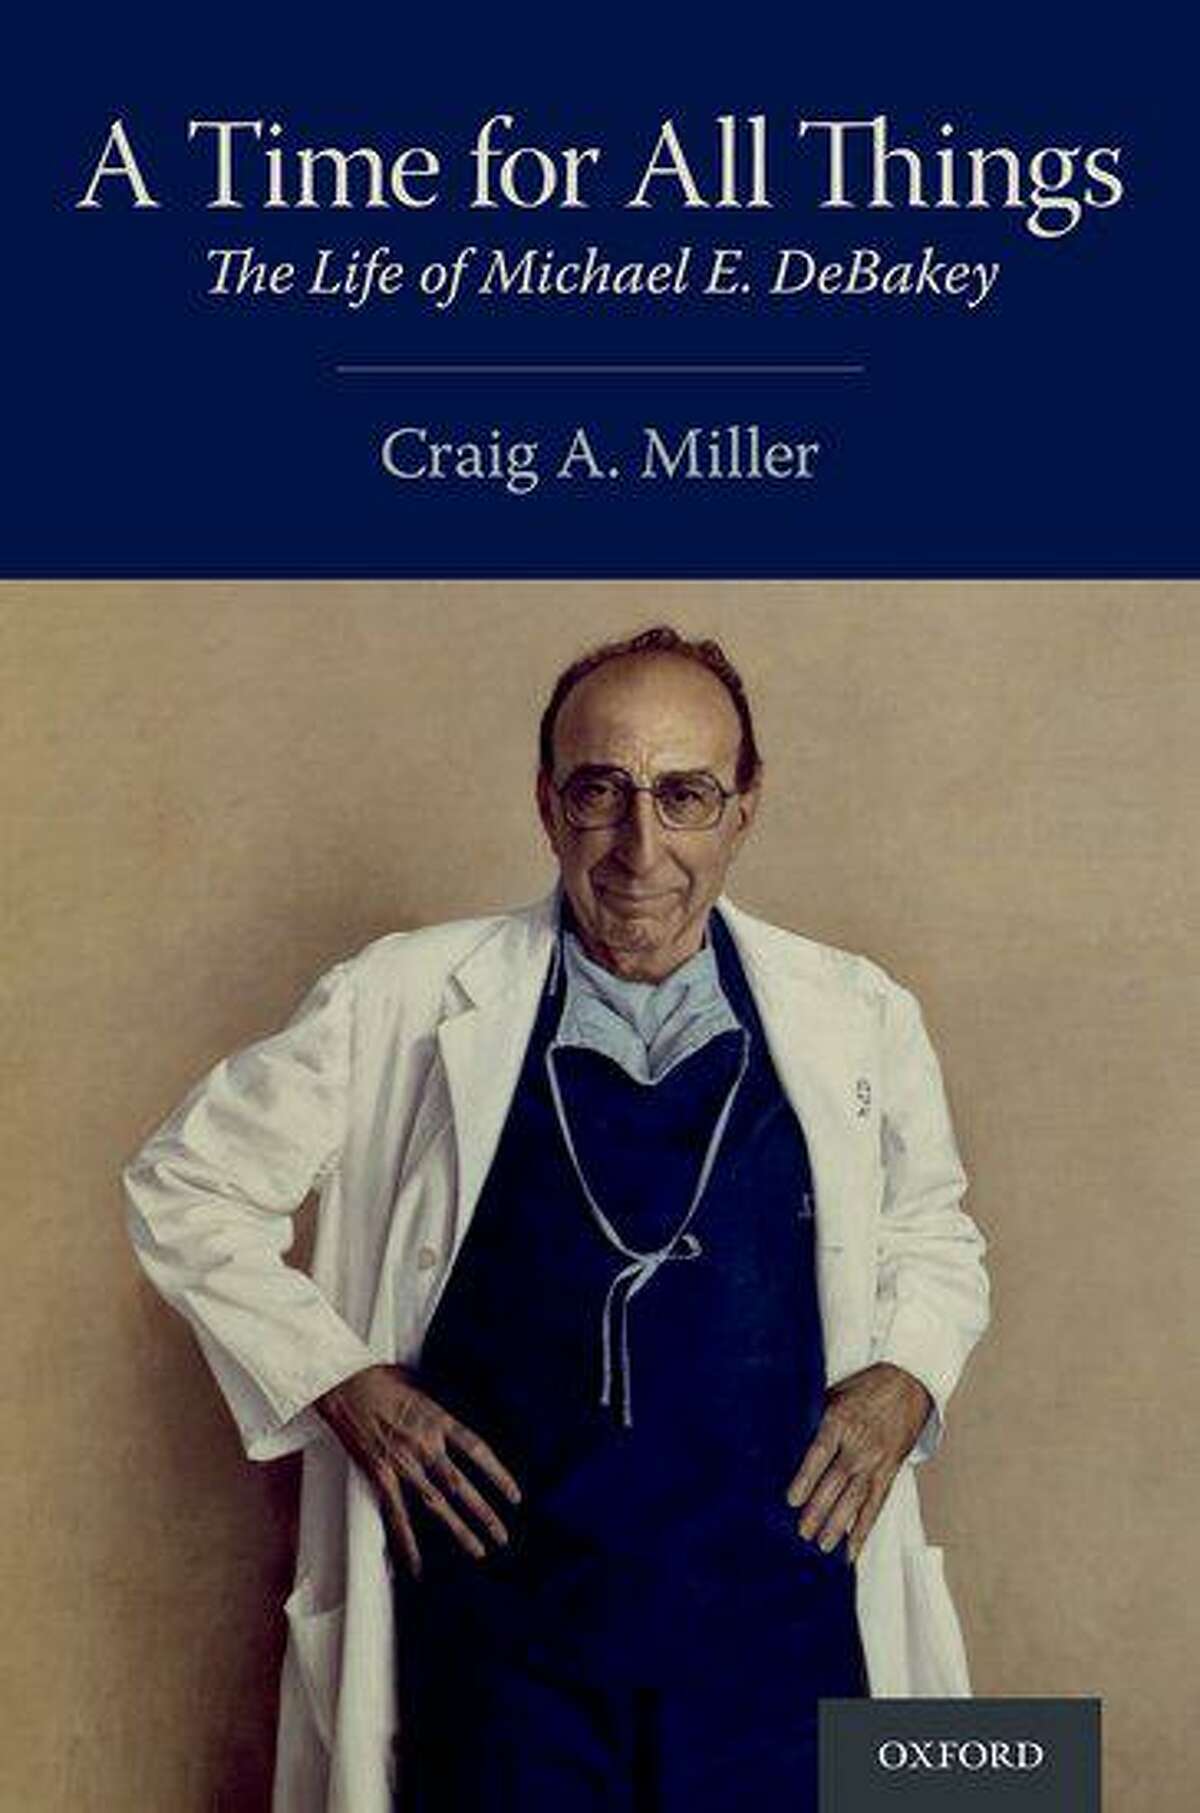 Cover image for "A Time for All Things: The life of Michael E. DeBakey" by Craig A. Miller, published in 2019 by Oxford University Press